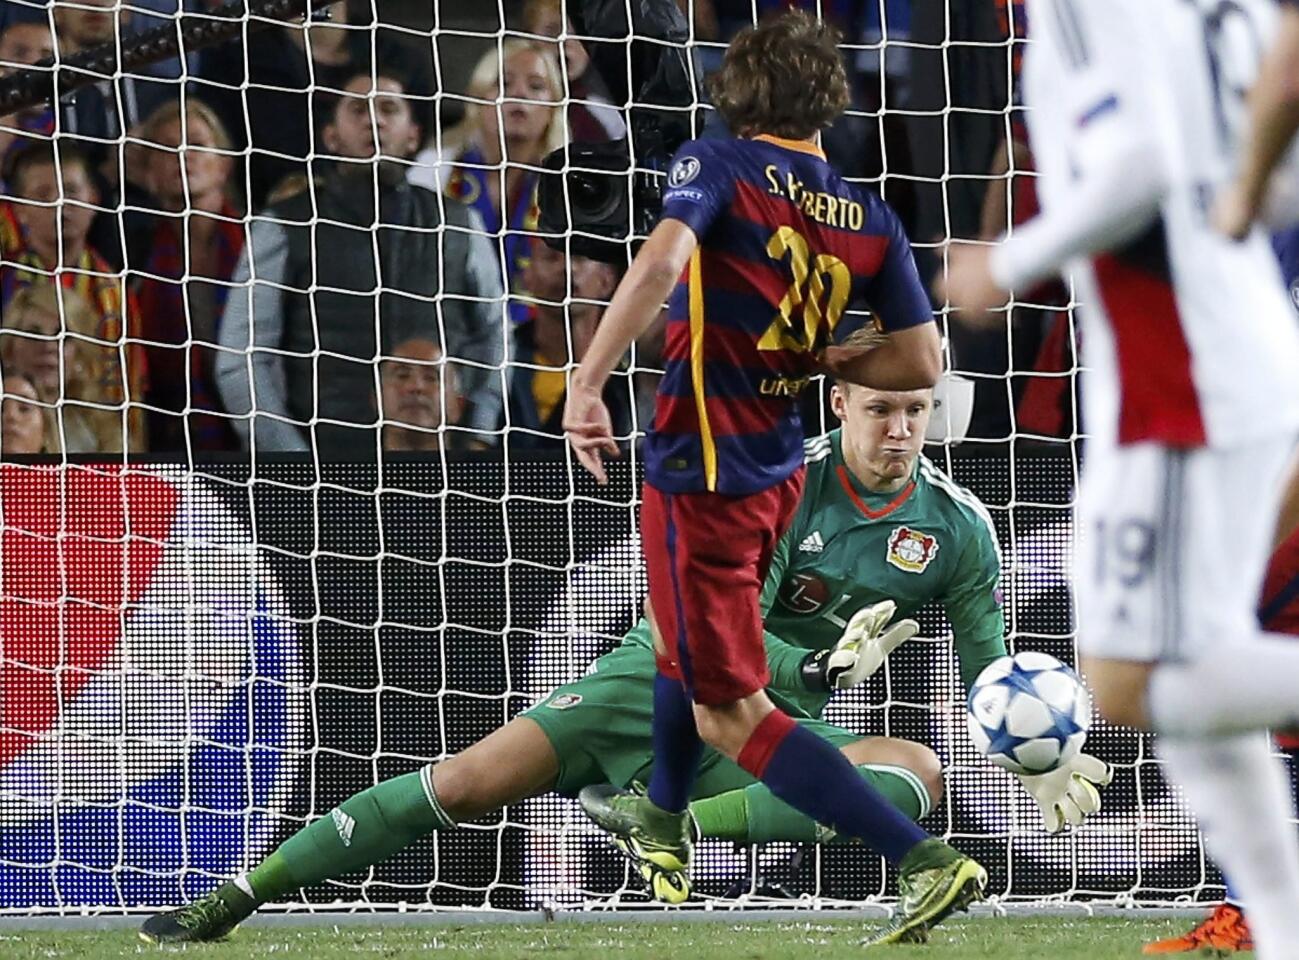 Barcelona's Sergi Roberto scores a goal during their Champions League group E soccer match at Camp Nou stadium in Barcelona